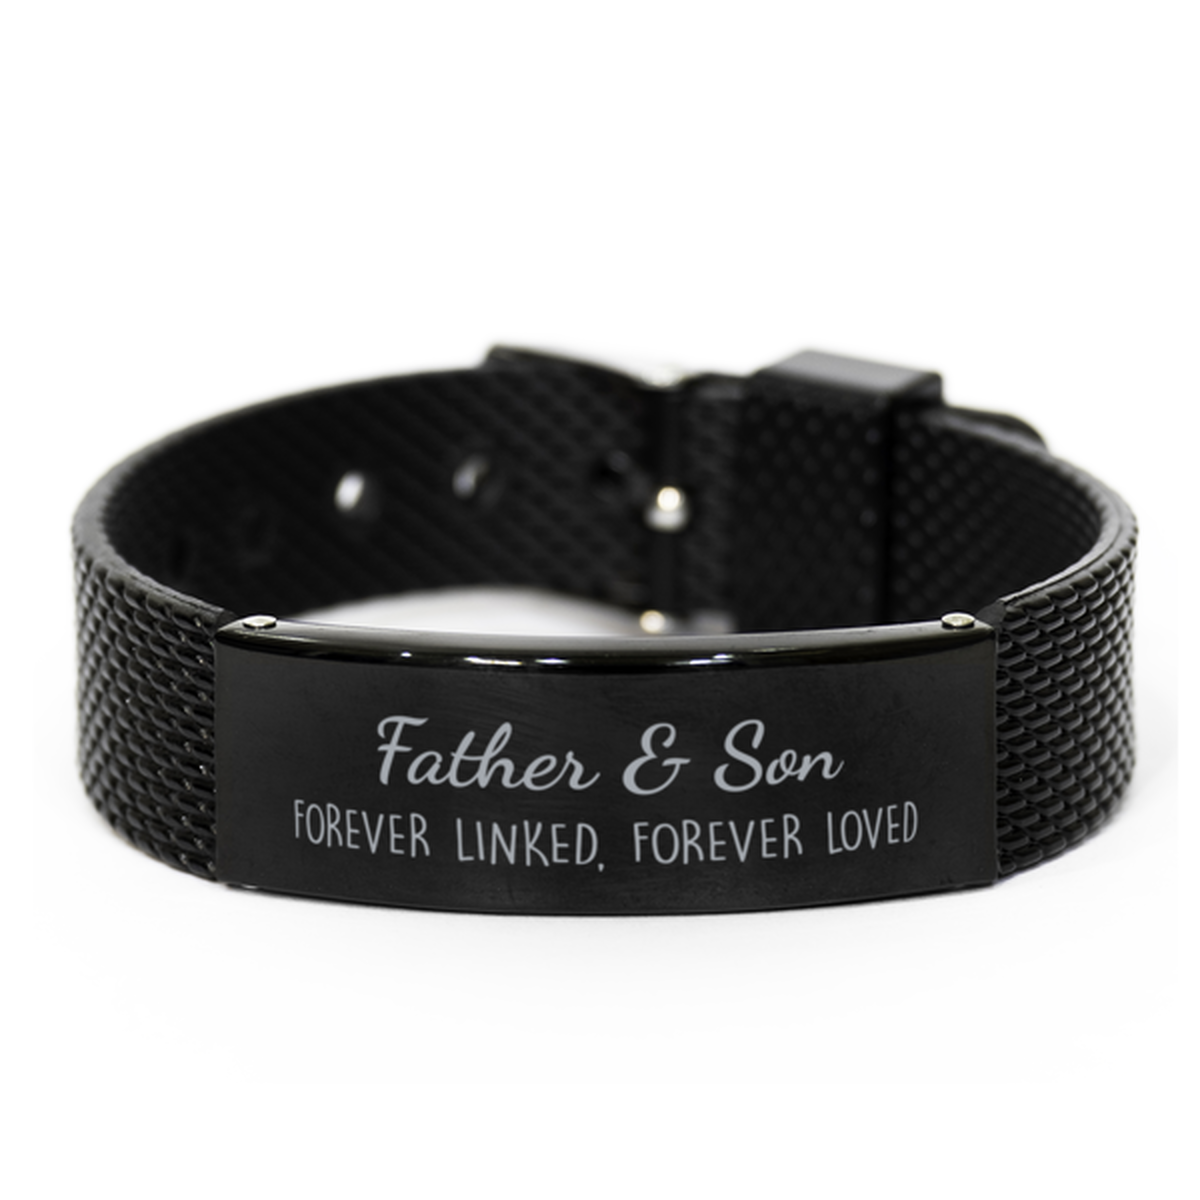 Father and Son Forever Linked Forever Loved Bracelet, Father Son Bracelet, Black Stainless Steel Leather Bracelet, Birthday, Christmas.